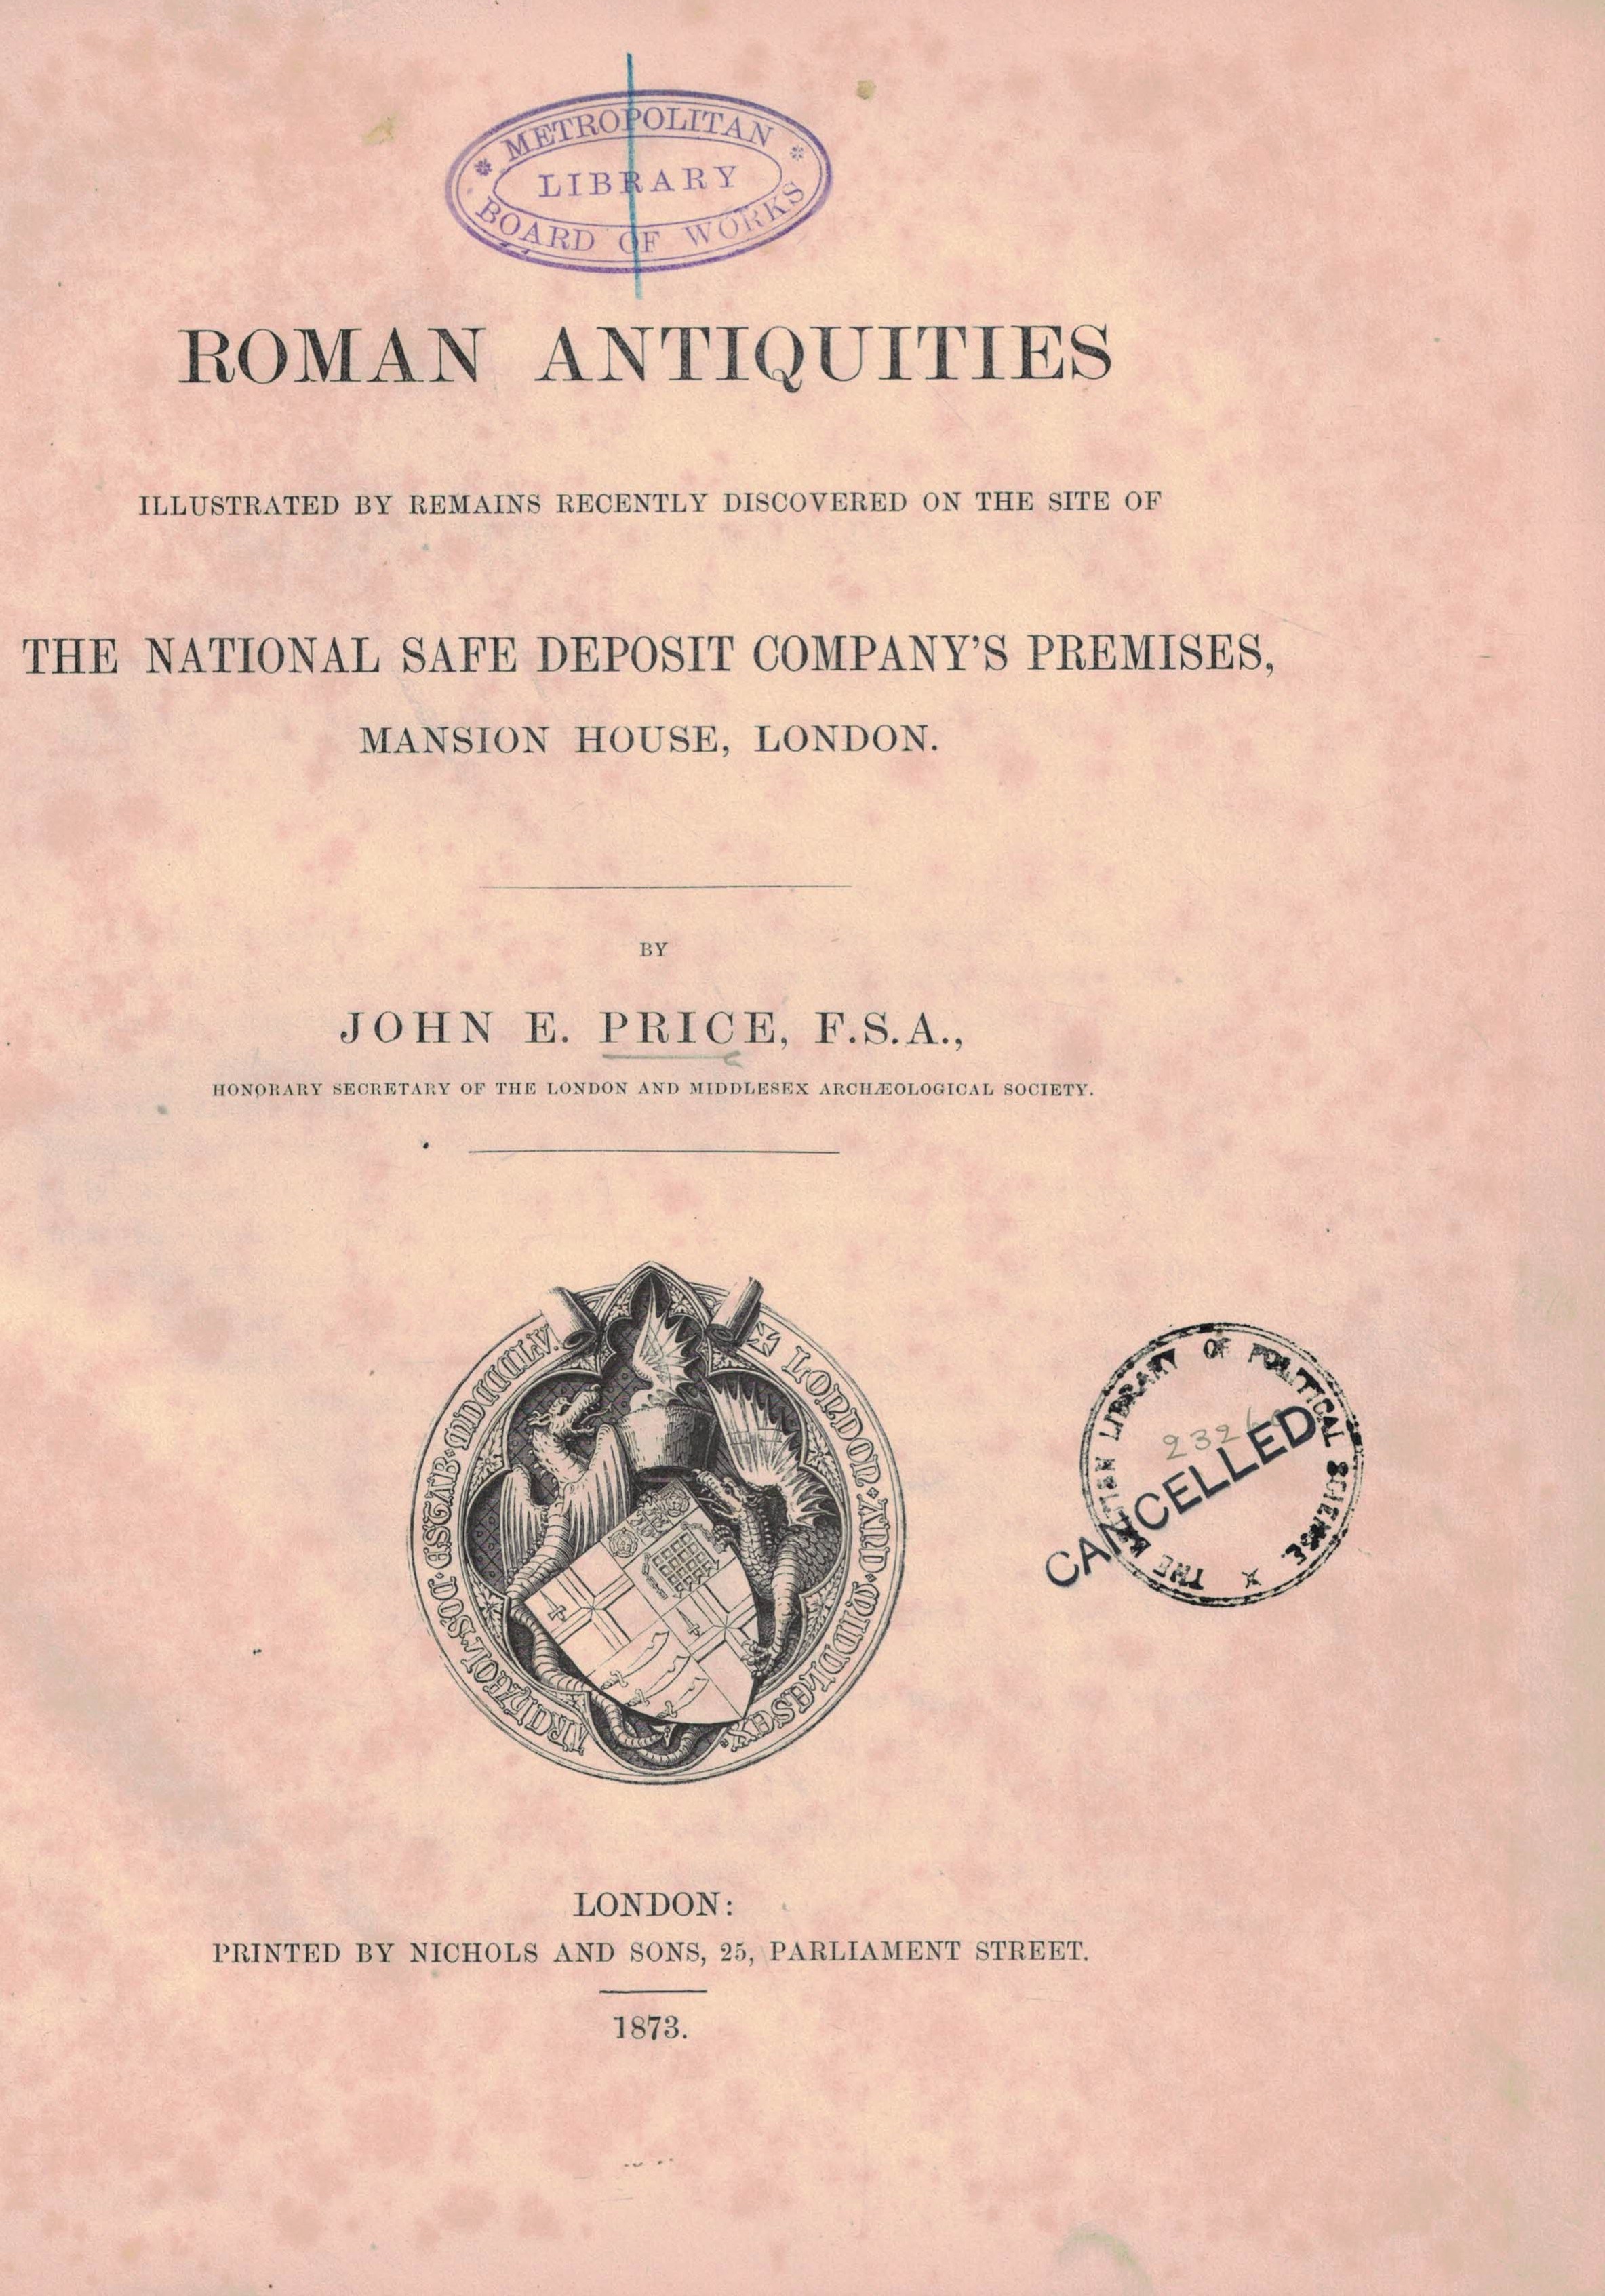 Roman Antiquities Recently Discovered on the Site of the National Safe Deposit Company's Premises, Mansion House, London. Presentation copy.